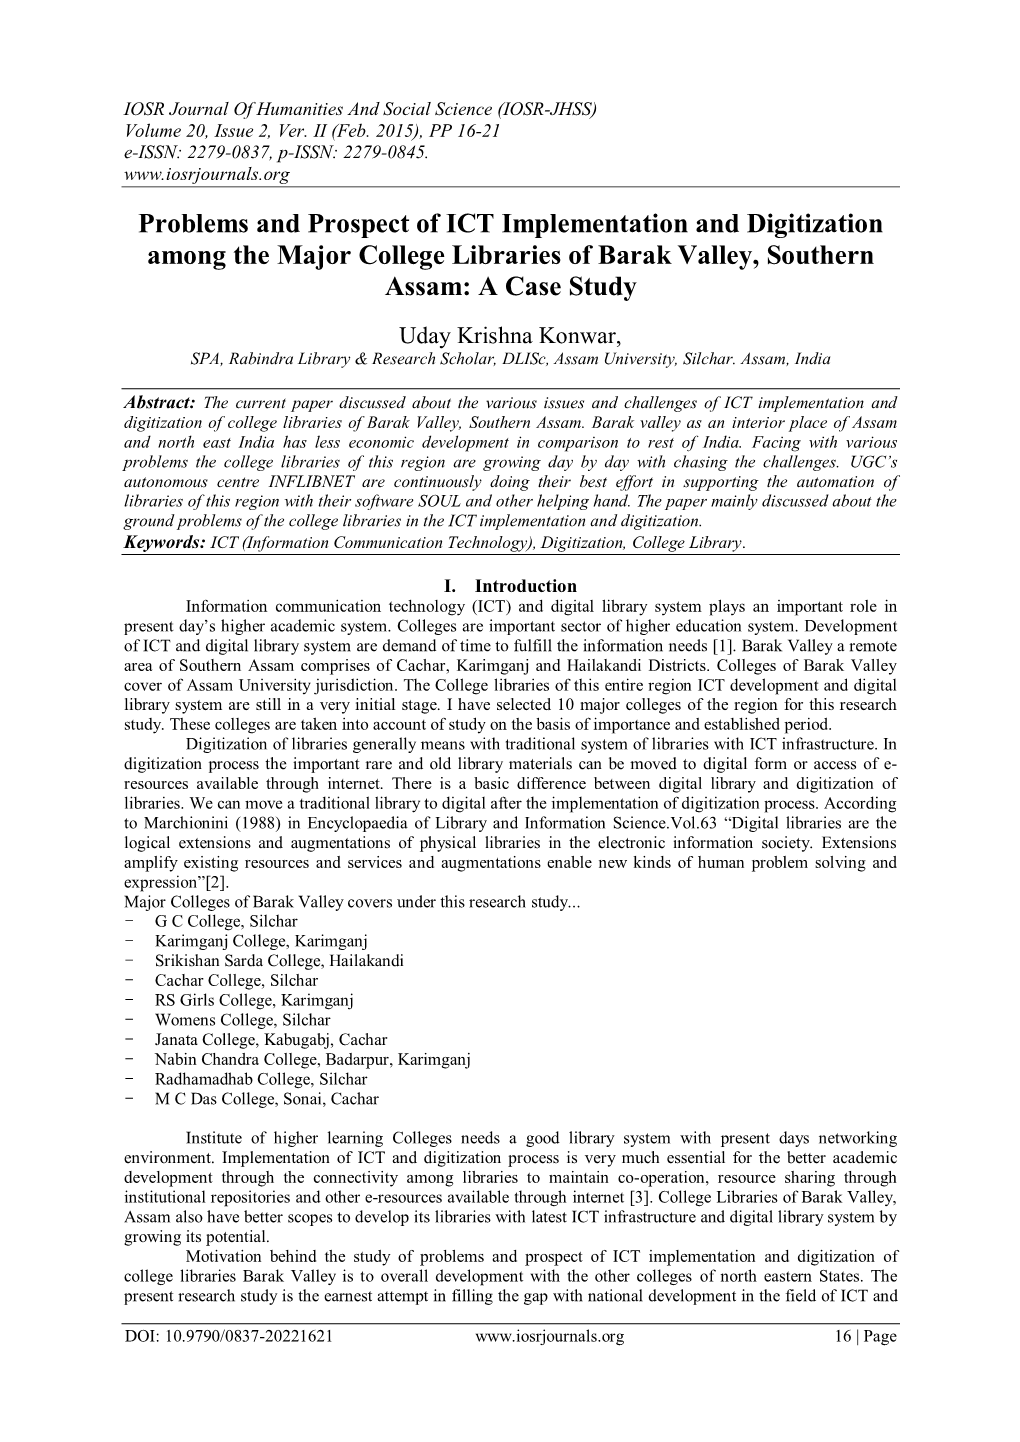 Problems and Prospect of ICT Implementation and Digitization Among the Major College Libraries of Barak Valley, Southern Assam: a Case Study